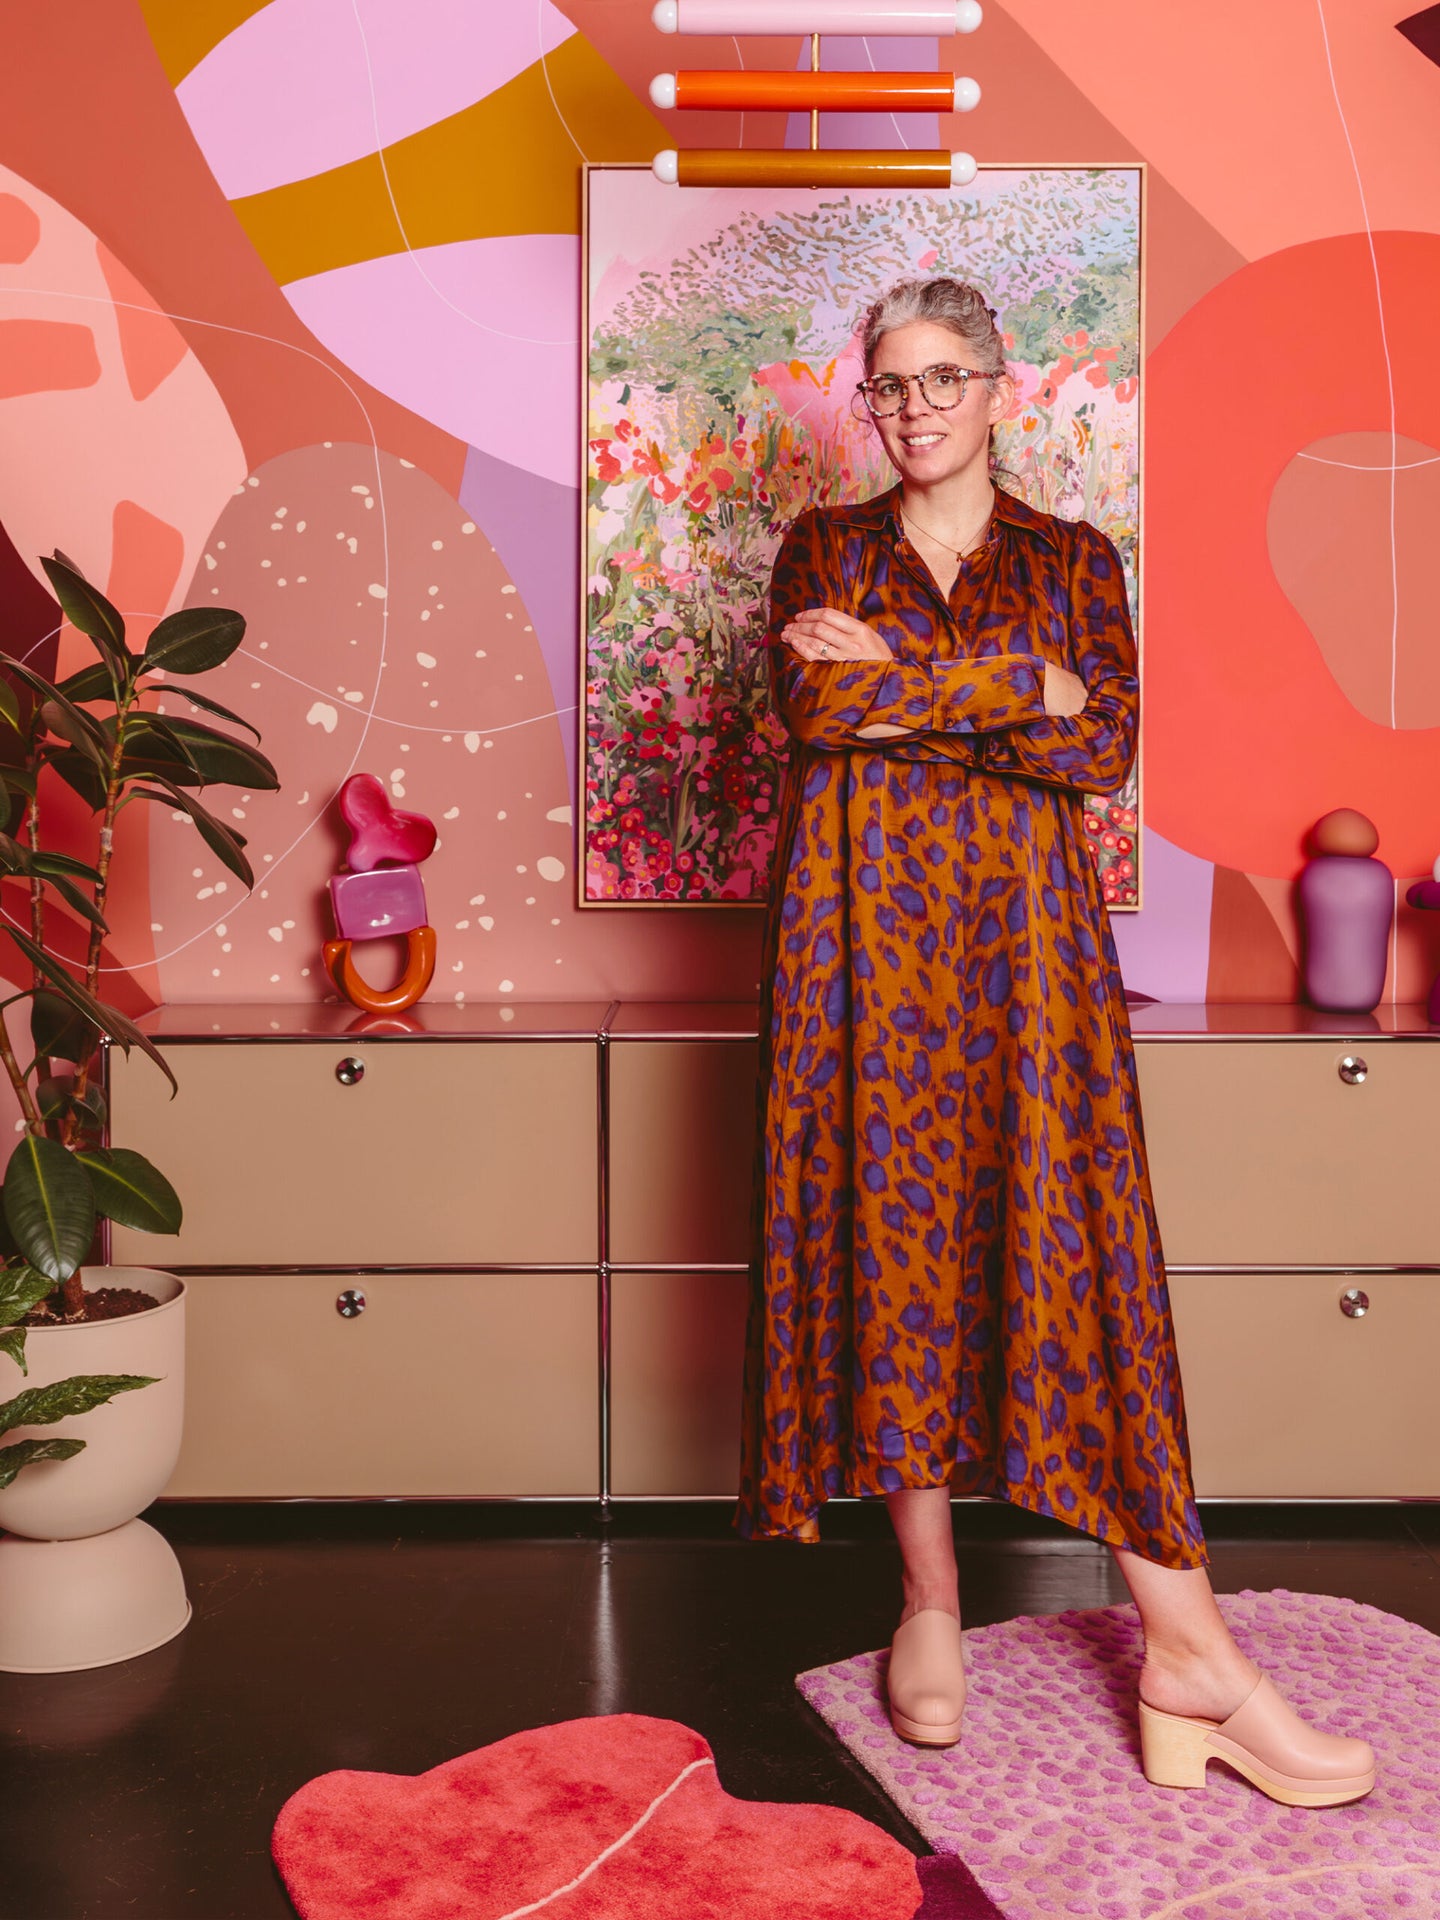 Woman in a leopard dress standing in front of a pink and orange mural